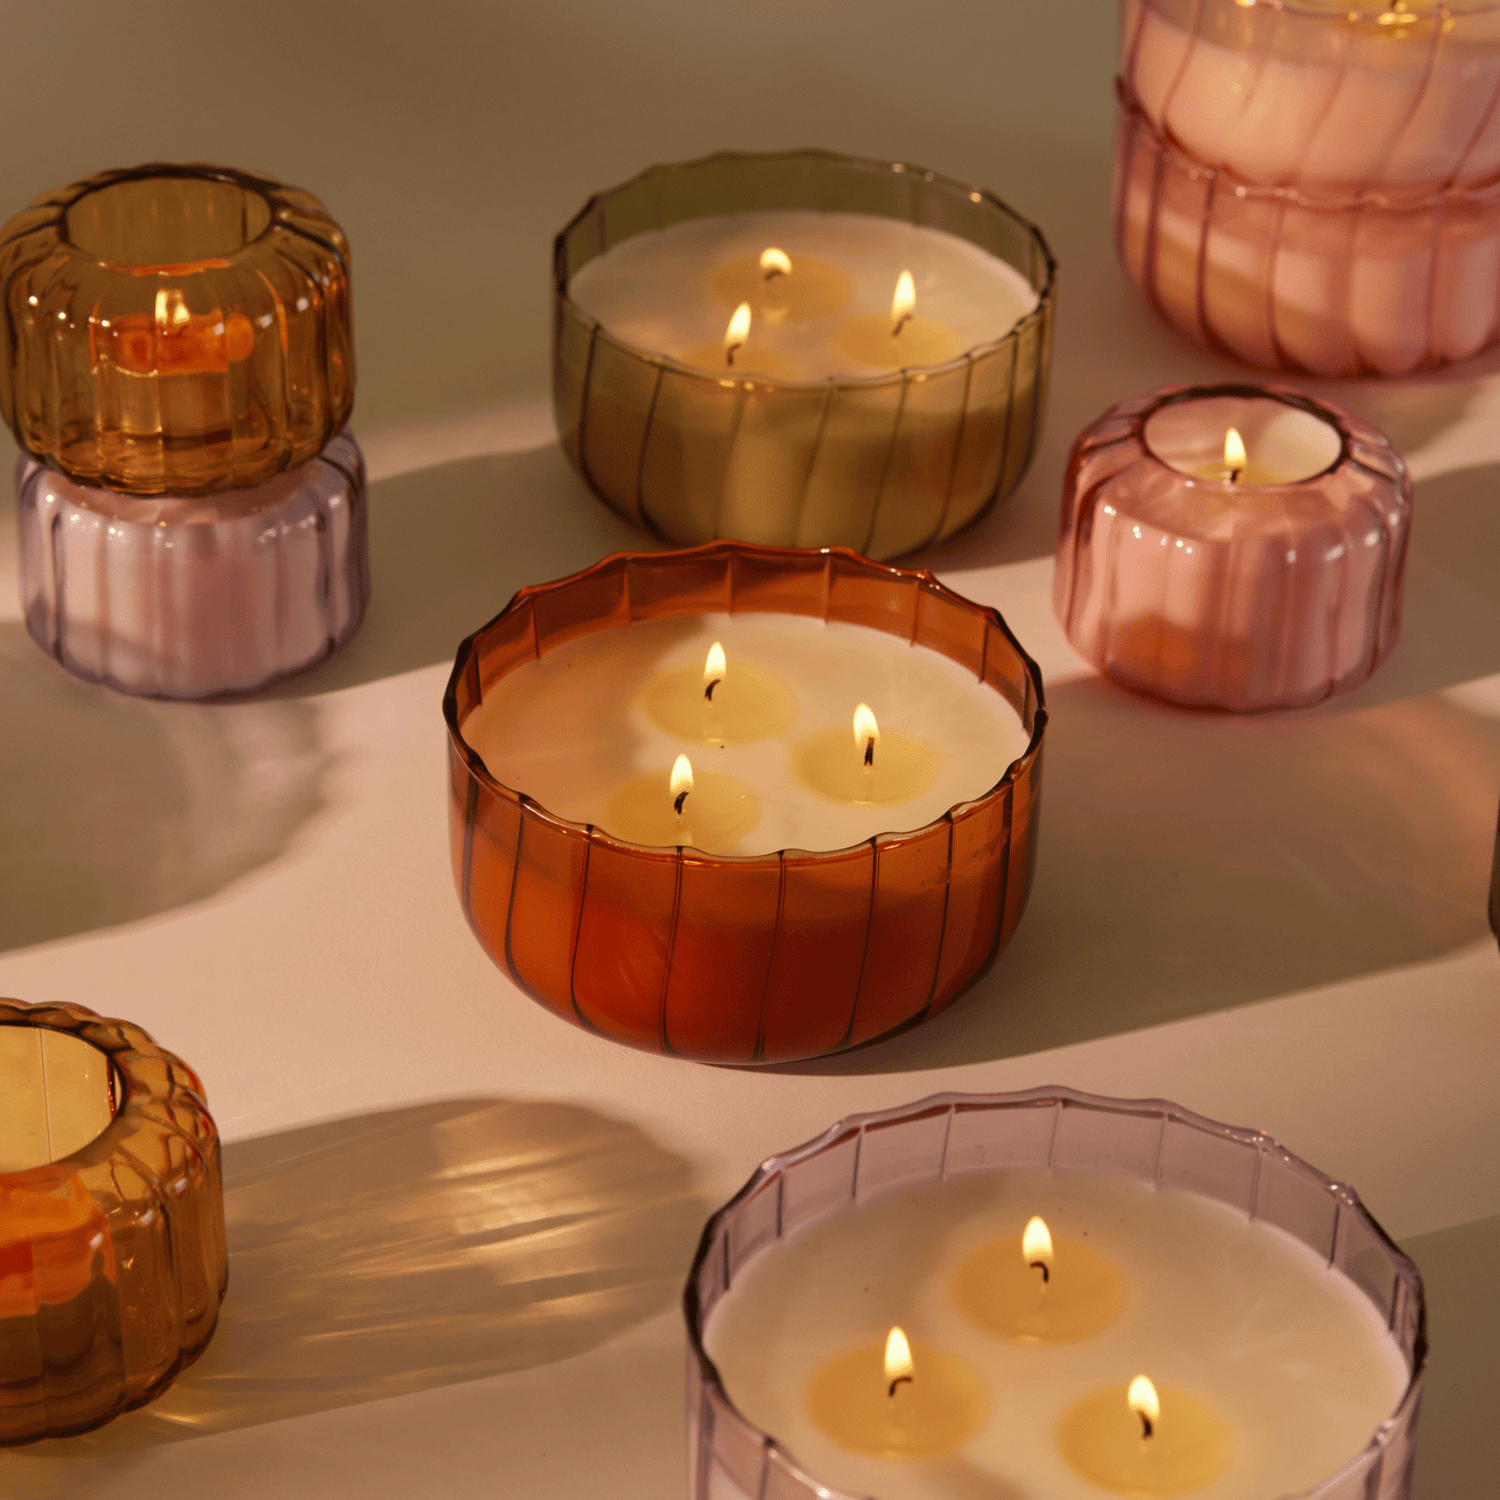 Ripple collection candles lit on a table top with deep shadow to the right